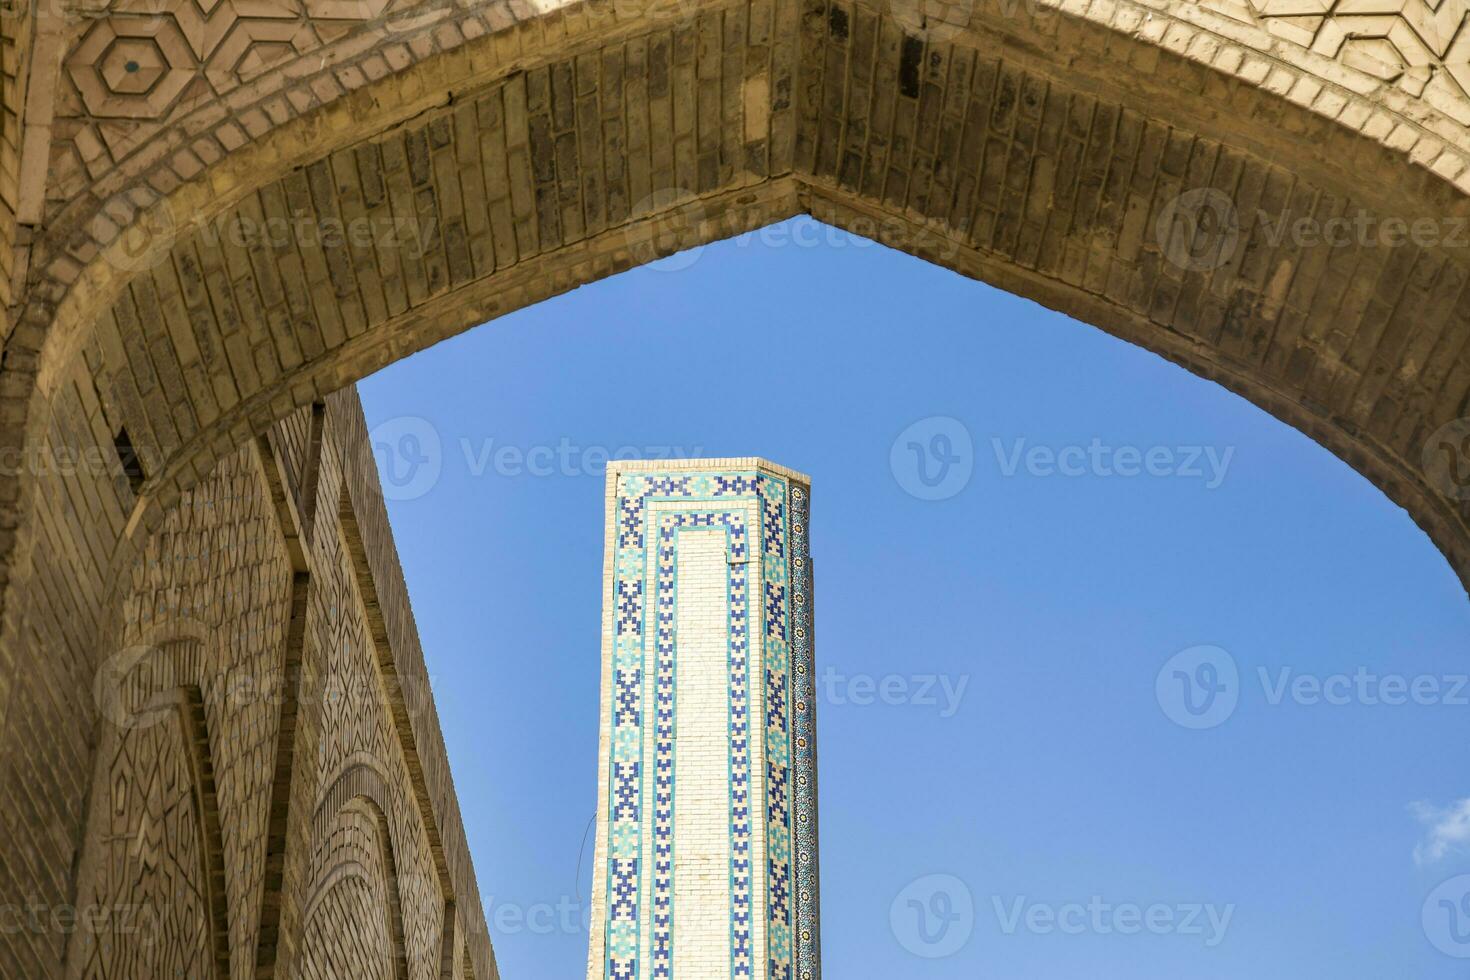 Building details. The Mosque Kalyan. One of the oldest and largest Mosque in Central Asia. Main cathedral mosque of Bukhara photo